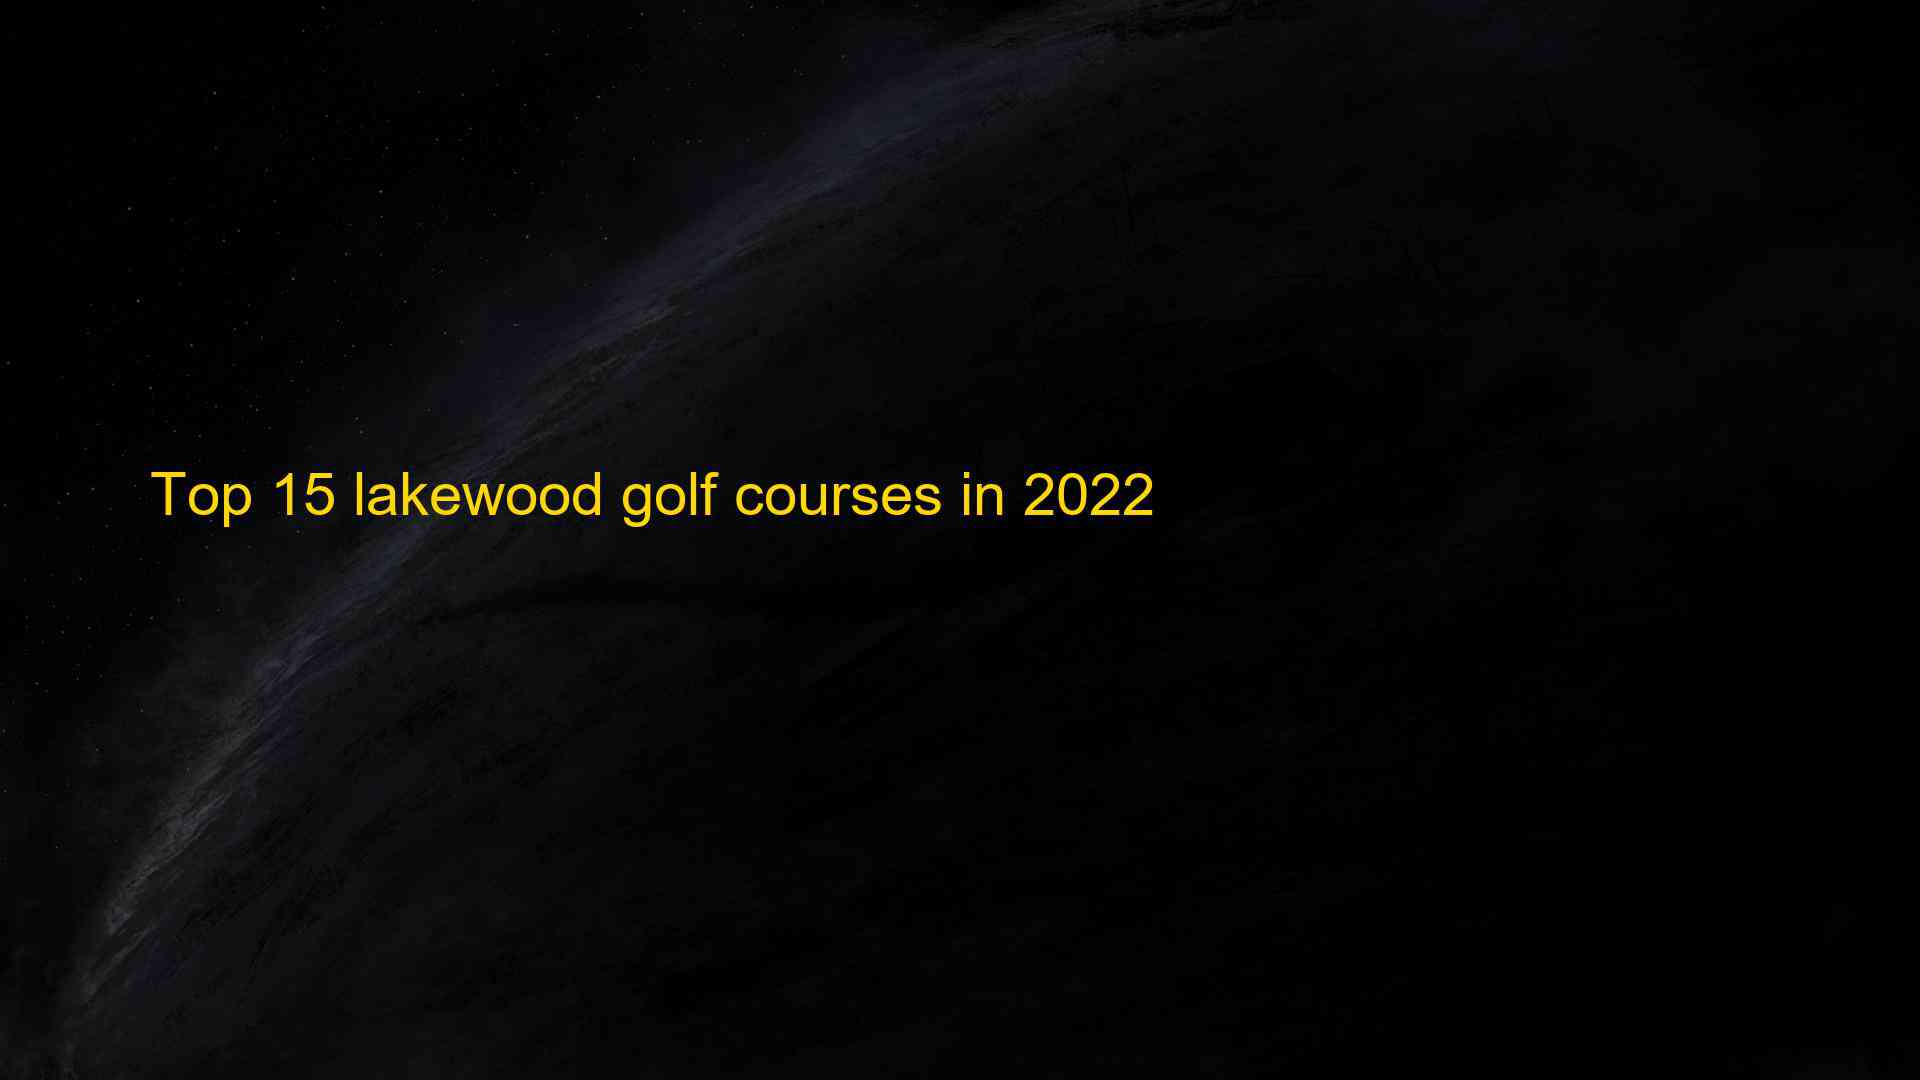 Top 15 lakewood golf courses in 2022 1660873128